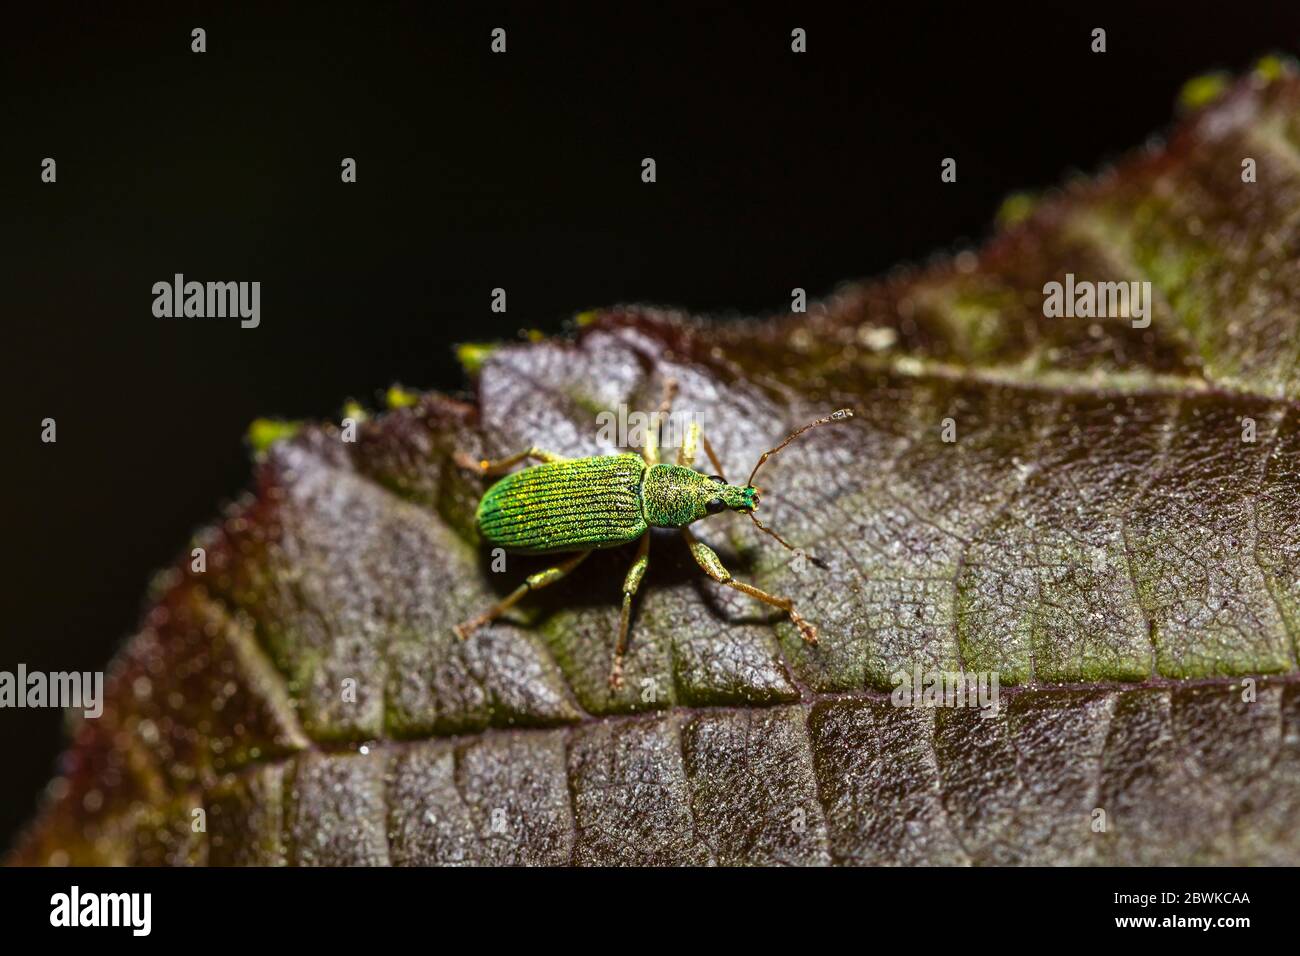 A small bright metallic green weevil (about 5mm), Polydrusus formosus, on the leaf of a red sycamore tree in a garden in spring in Surrey, UK Stock Photo